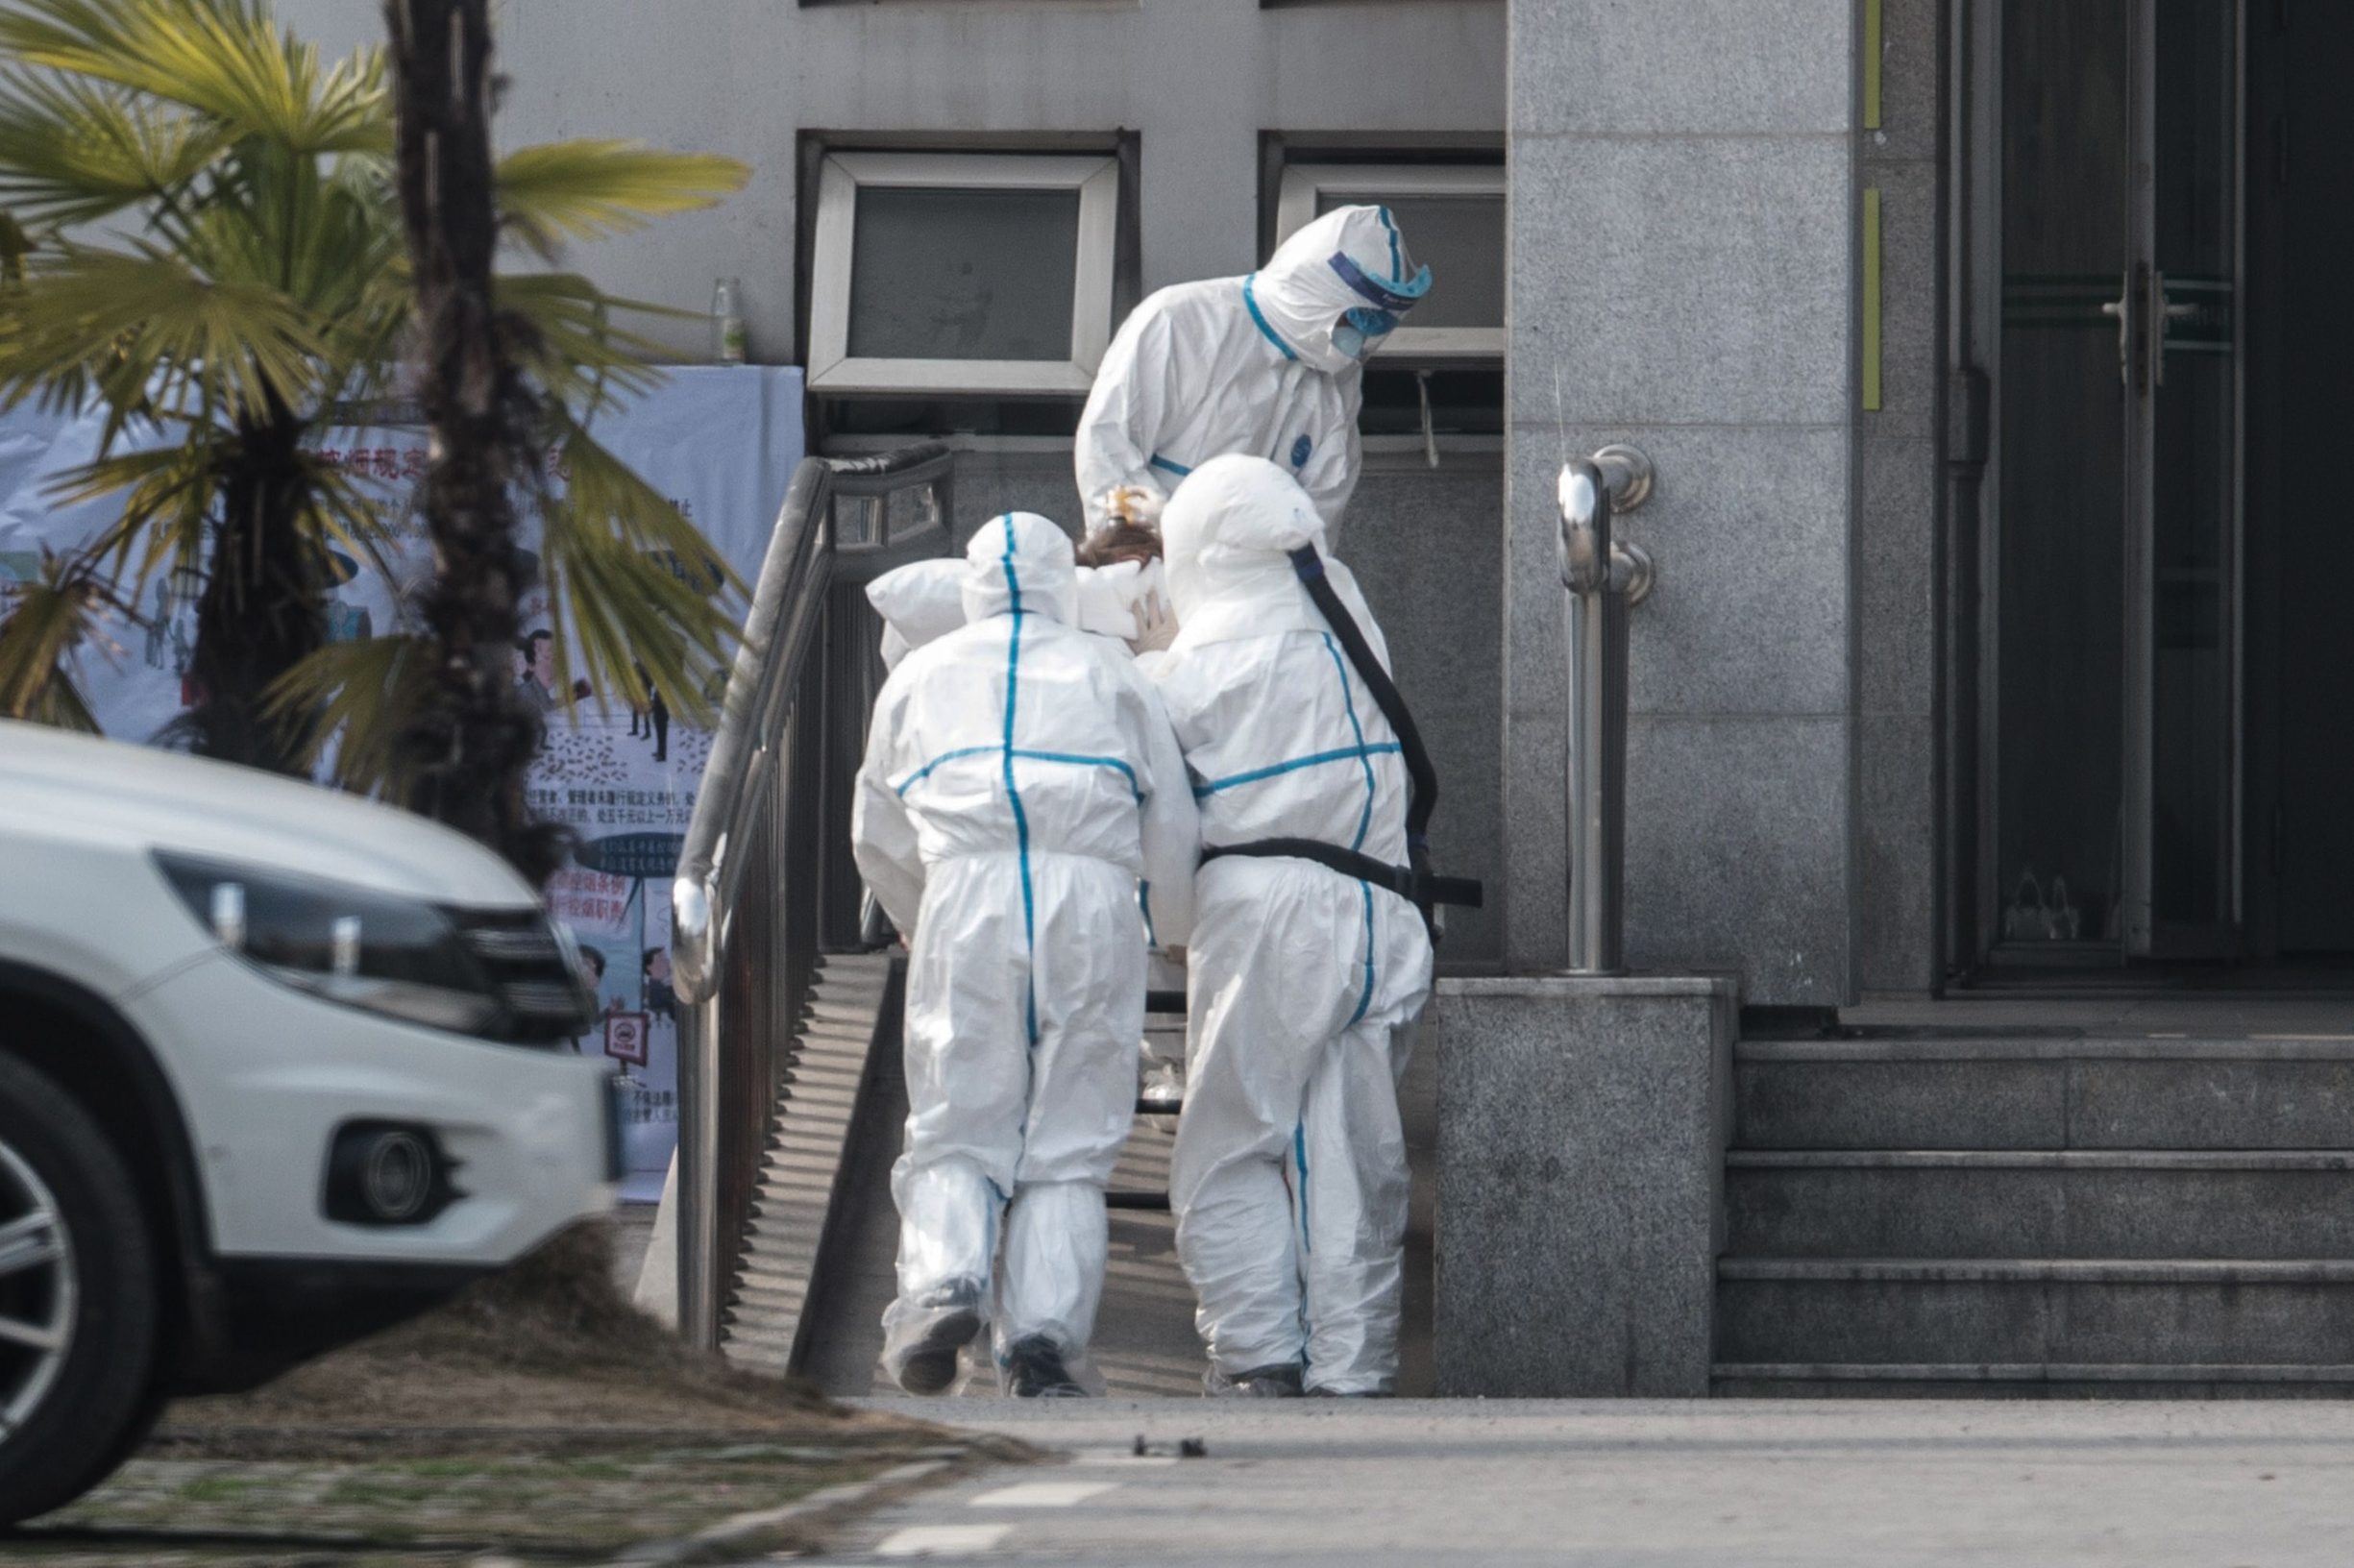 Medical staff members carry a patient into the Jinyintan hospital, where patients infected by a mysterious SARS-like virus are being treated, in Wuhan in China's central Hubei province on January 18, 2020. - The true scale of the outbreak of a mysterious SARS-like virus in China is likely far bigger than officially reported, scientists have warned, as countries ramp up measures to prevent the disease from spreading. (Photo by STR / AFP) / China OUT